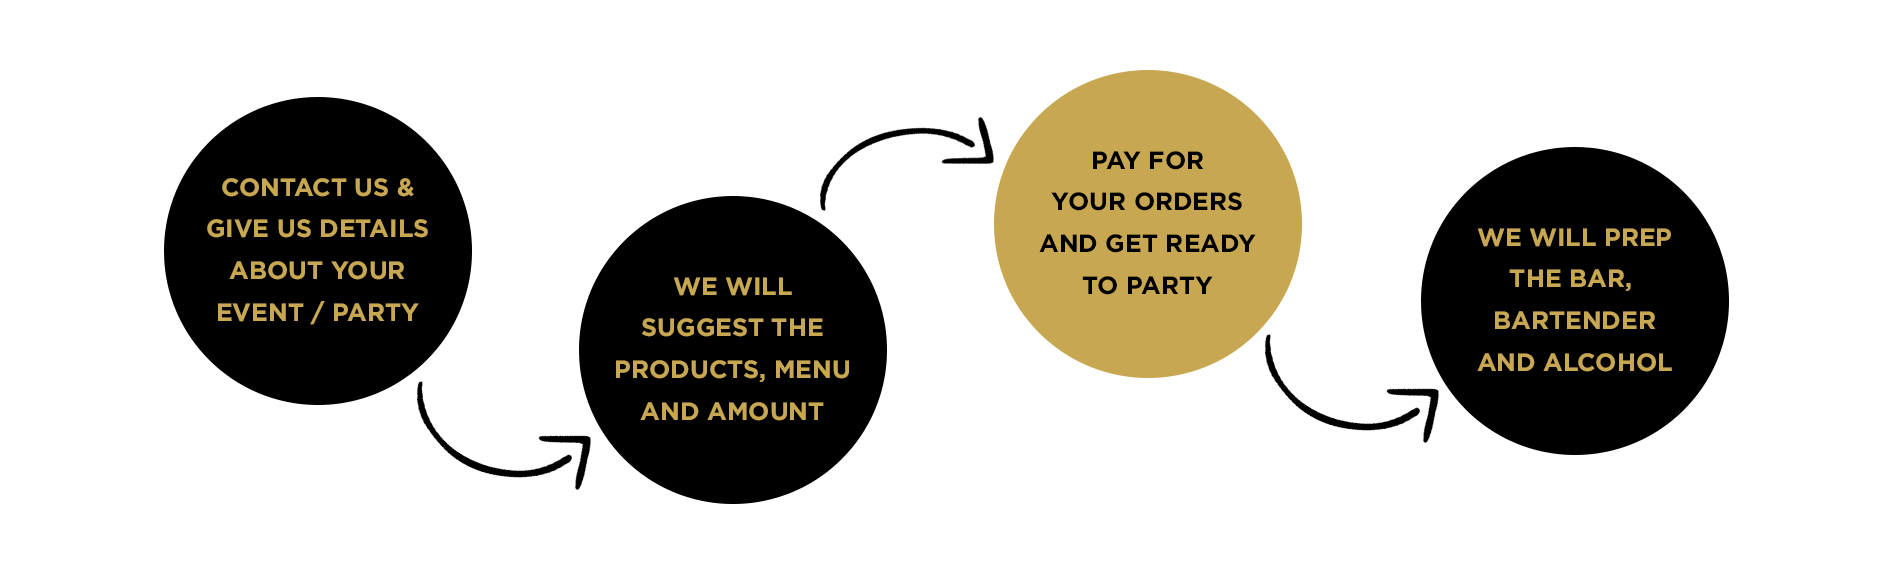 Bossbotol - How To Order Private Event